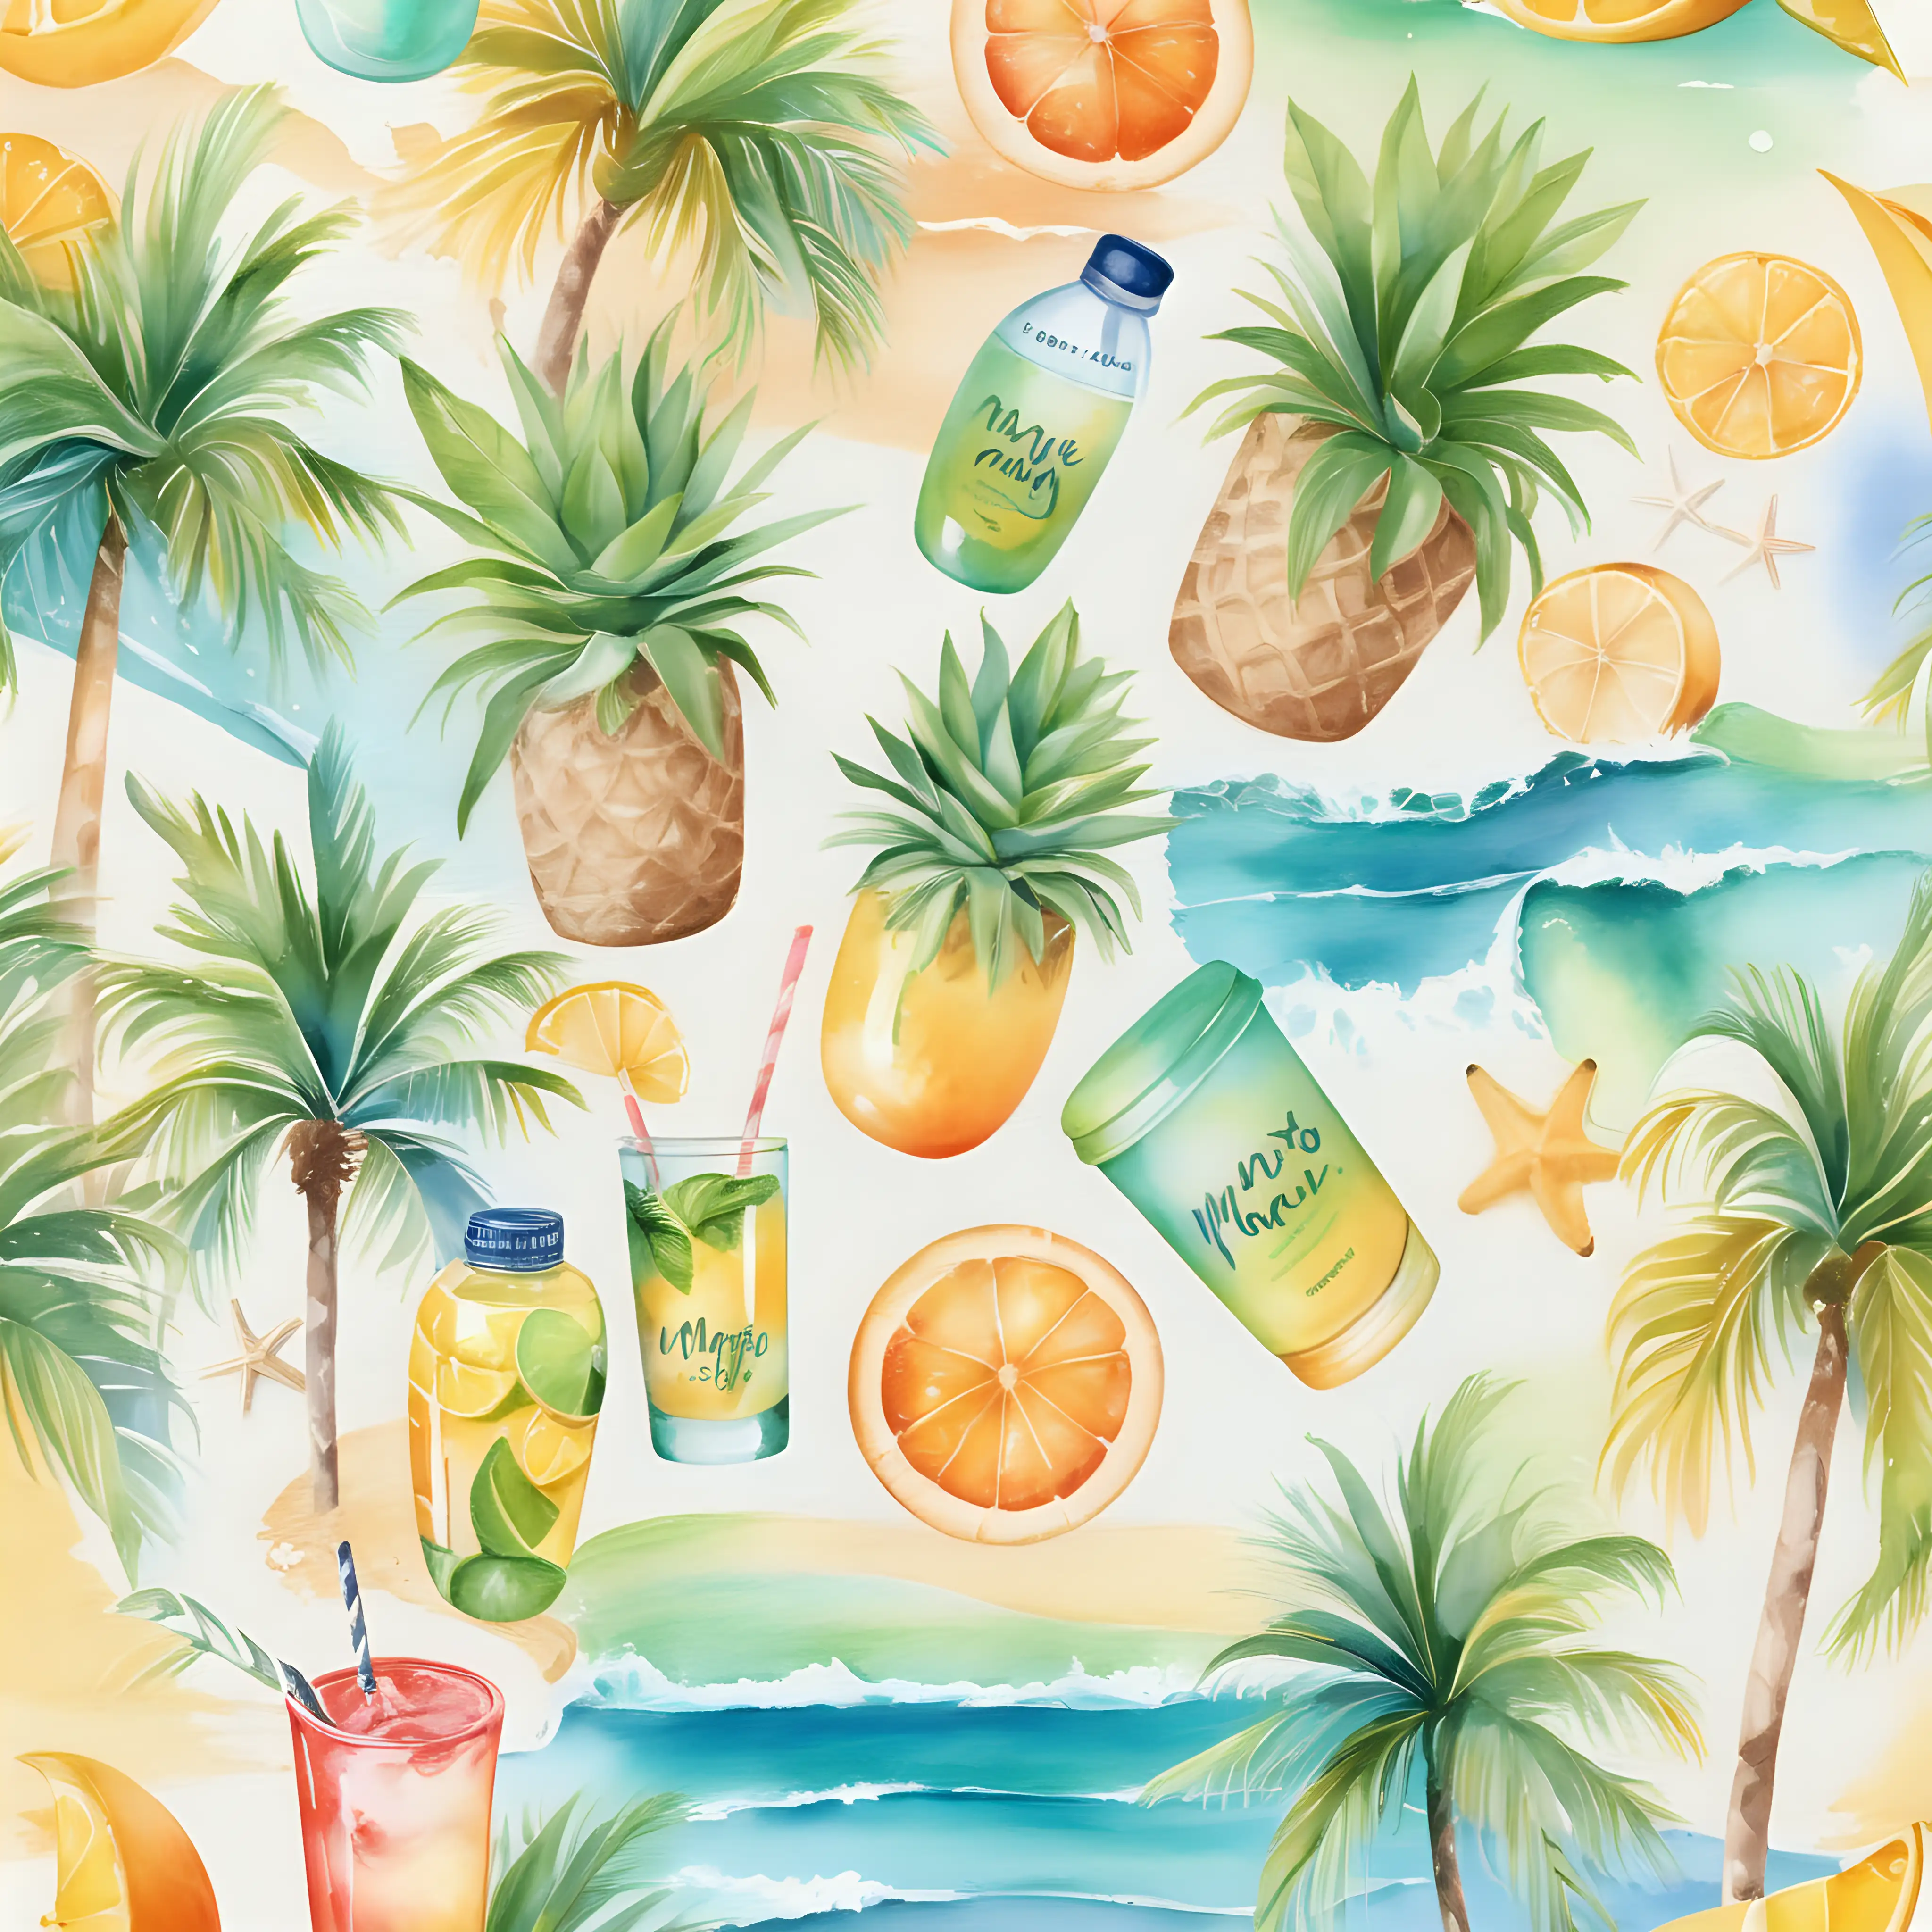 Graphic design for the May box. Abstract print backgrounds or illustrations expressing euphoric summer vibes and the tan glaze aesthetic associated with the Beach ready theme. Visually appealing packaging design. You know what they say: girls just wanna have sun, and happiness comes in waves. So, grab a mojito and dive into this summer beauty playground. watercolor